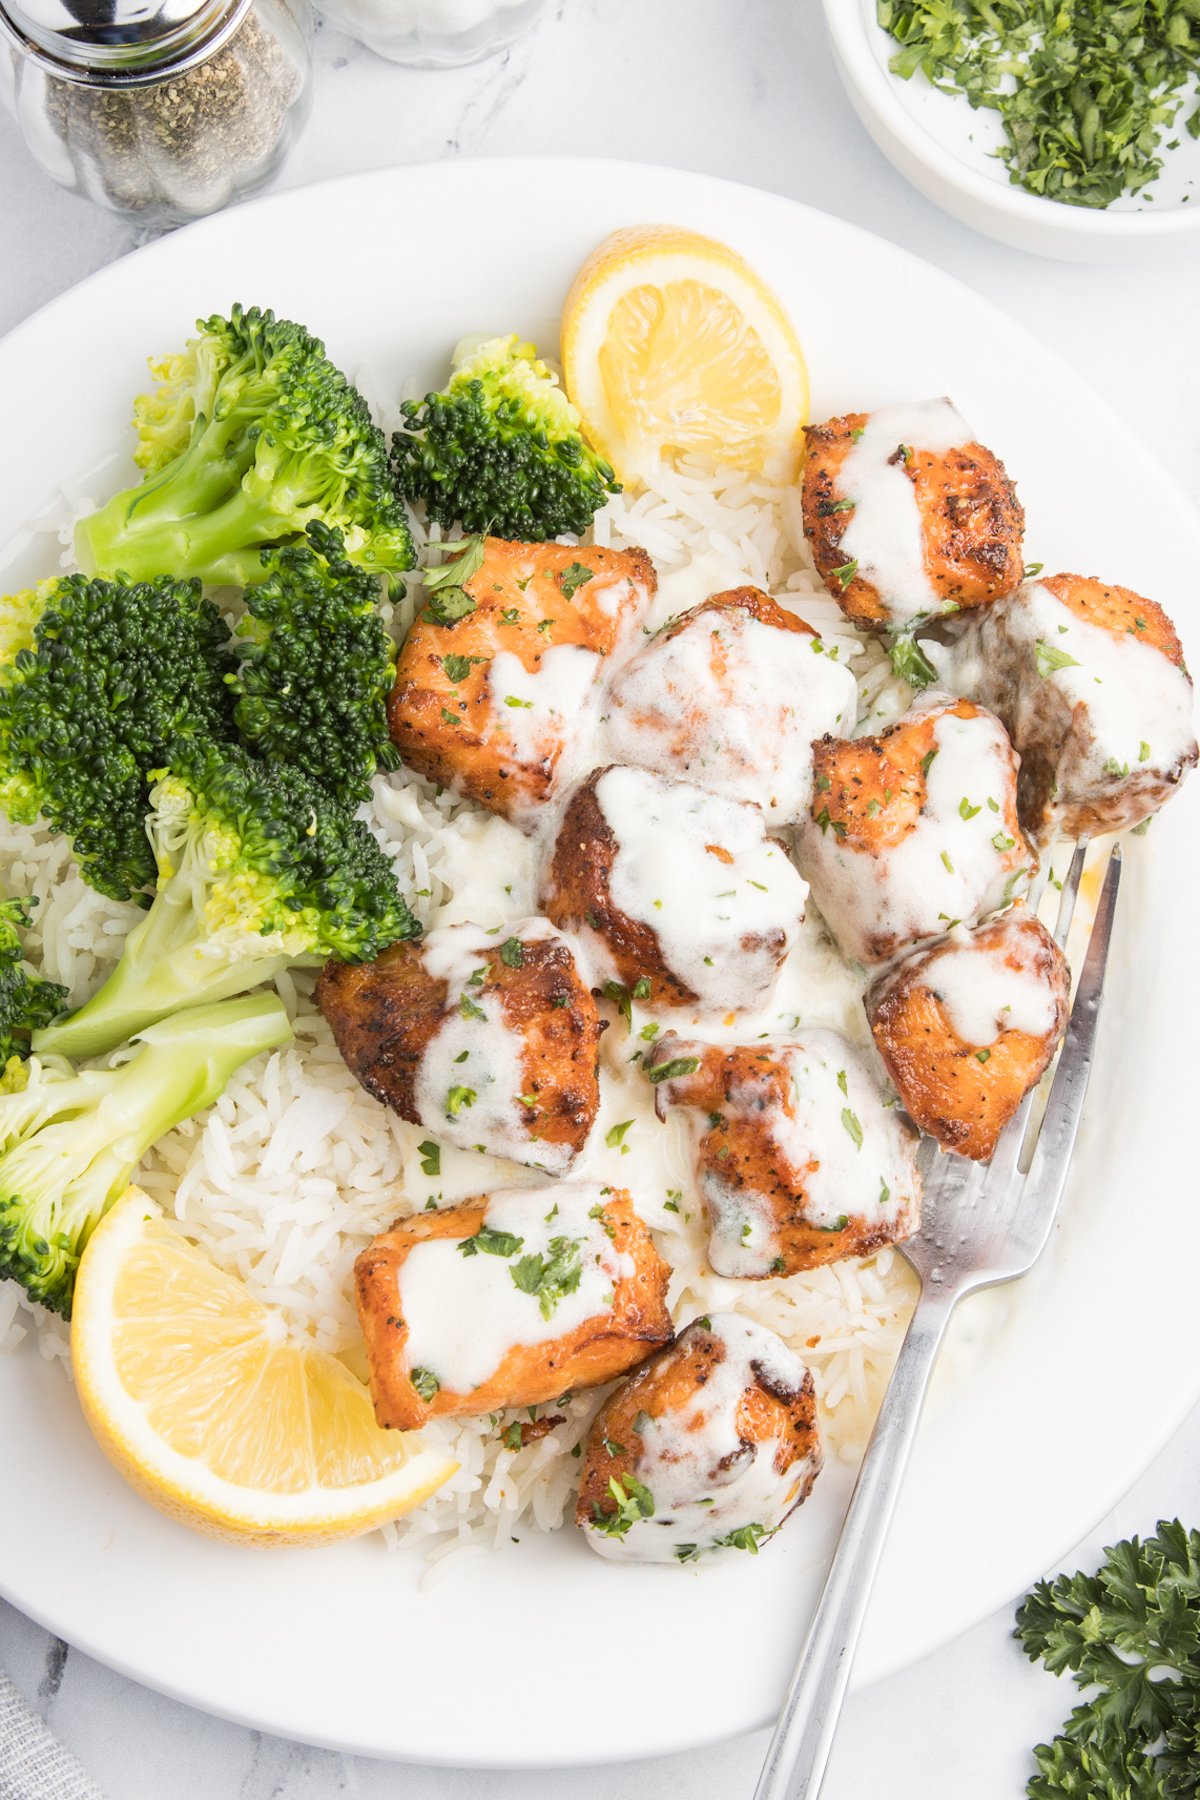 A white dinner plate with salmon bites covered in garlic cream sauce with white rice and broccoli. There are also two lemon slices, one has been squeezed.